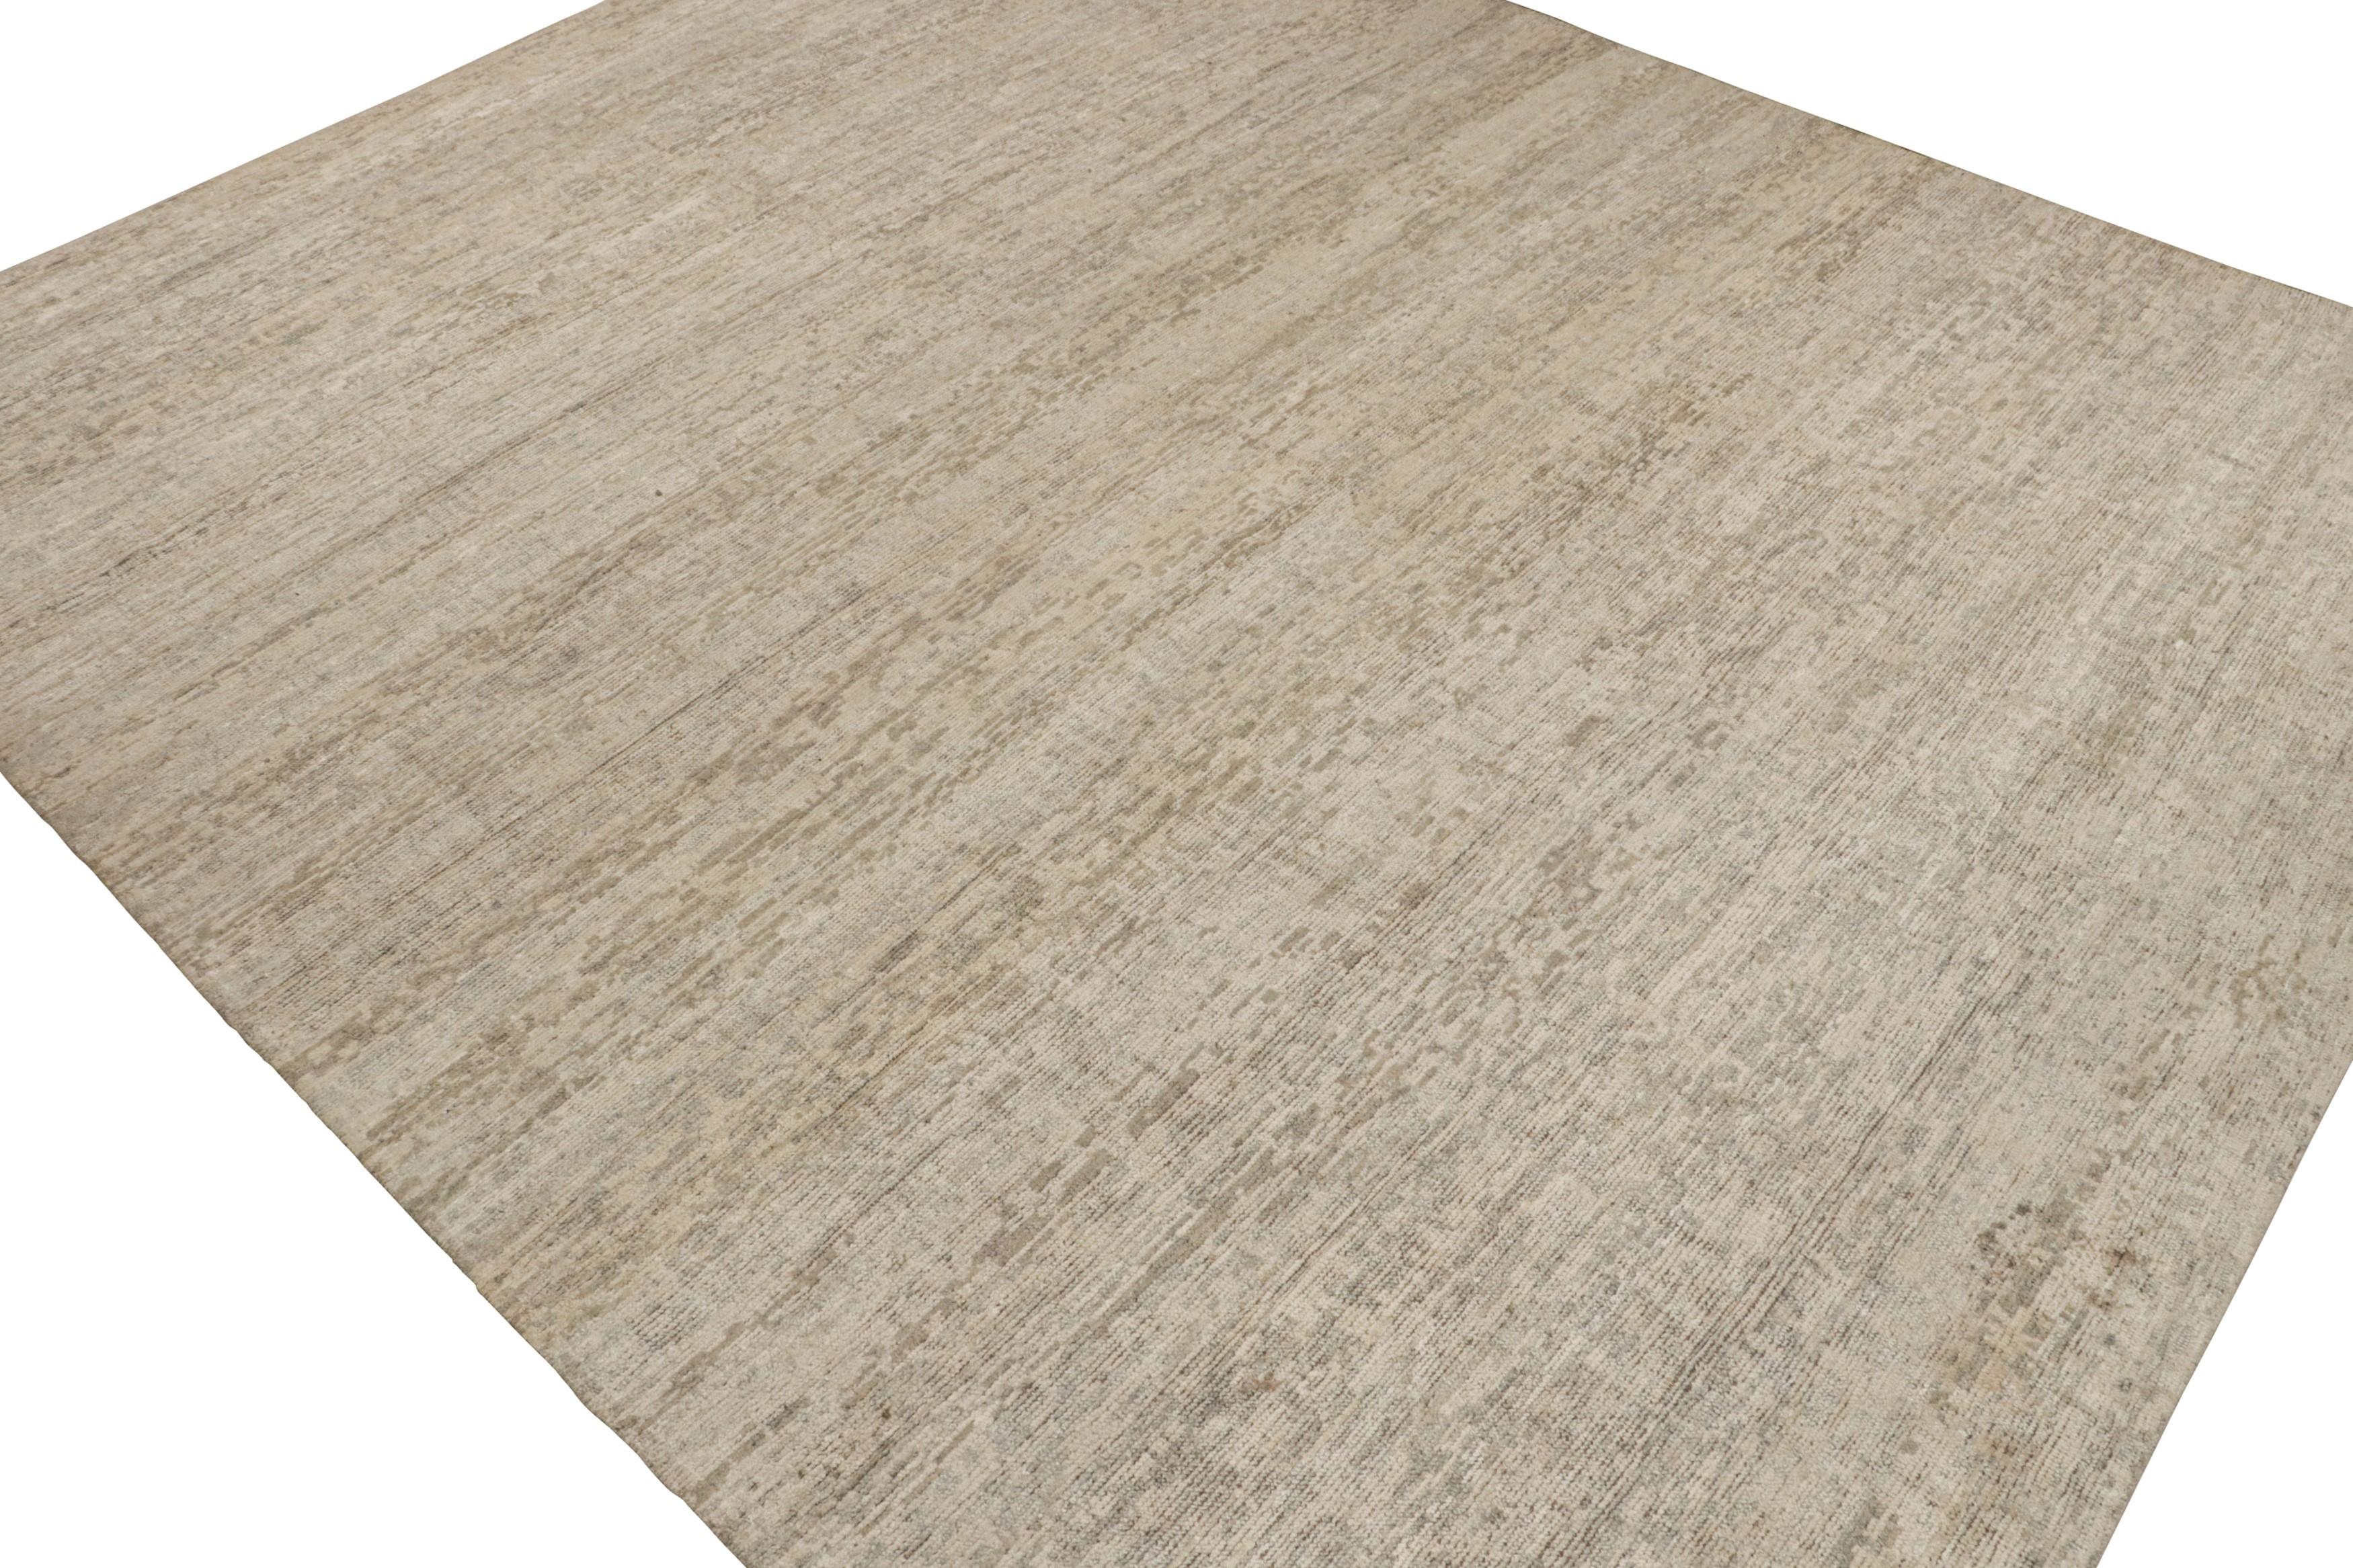 Indian  Rug & Kilim’s Contemporary Rug in Beige and Gray Tone-on-Tone Striae For Sale